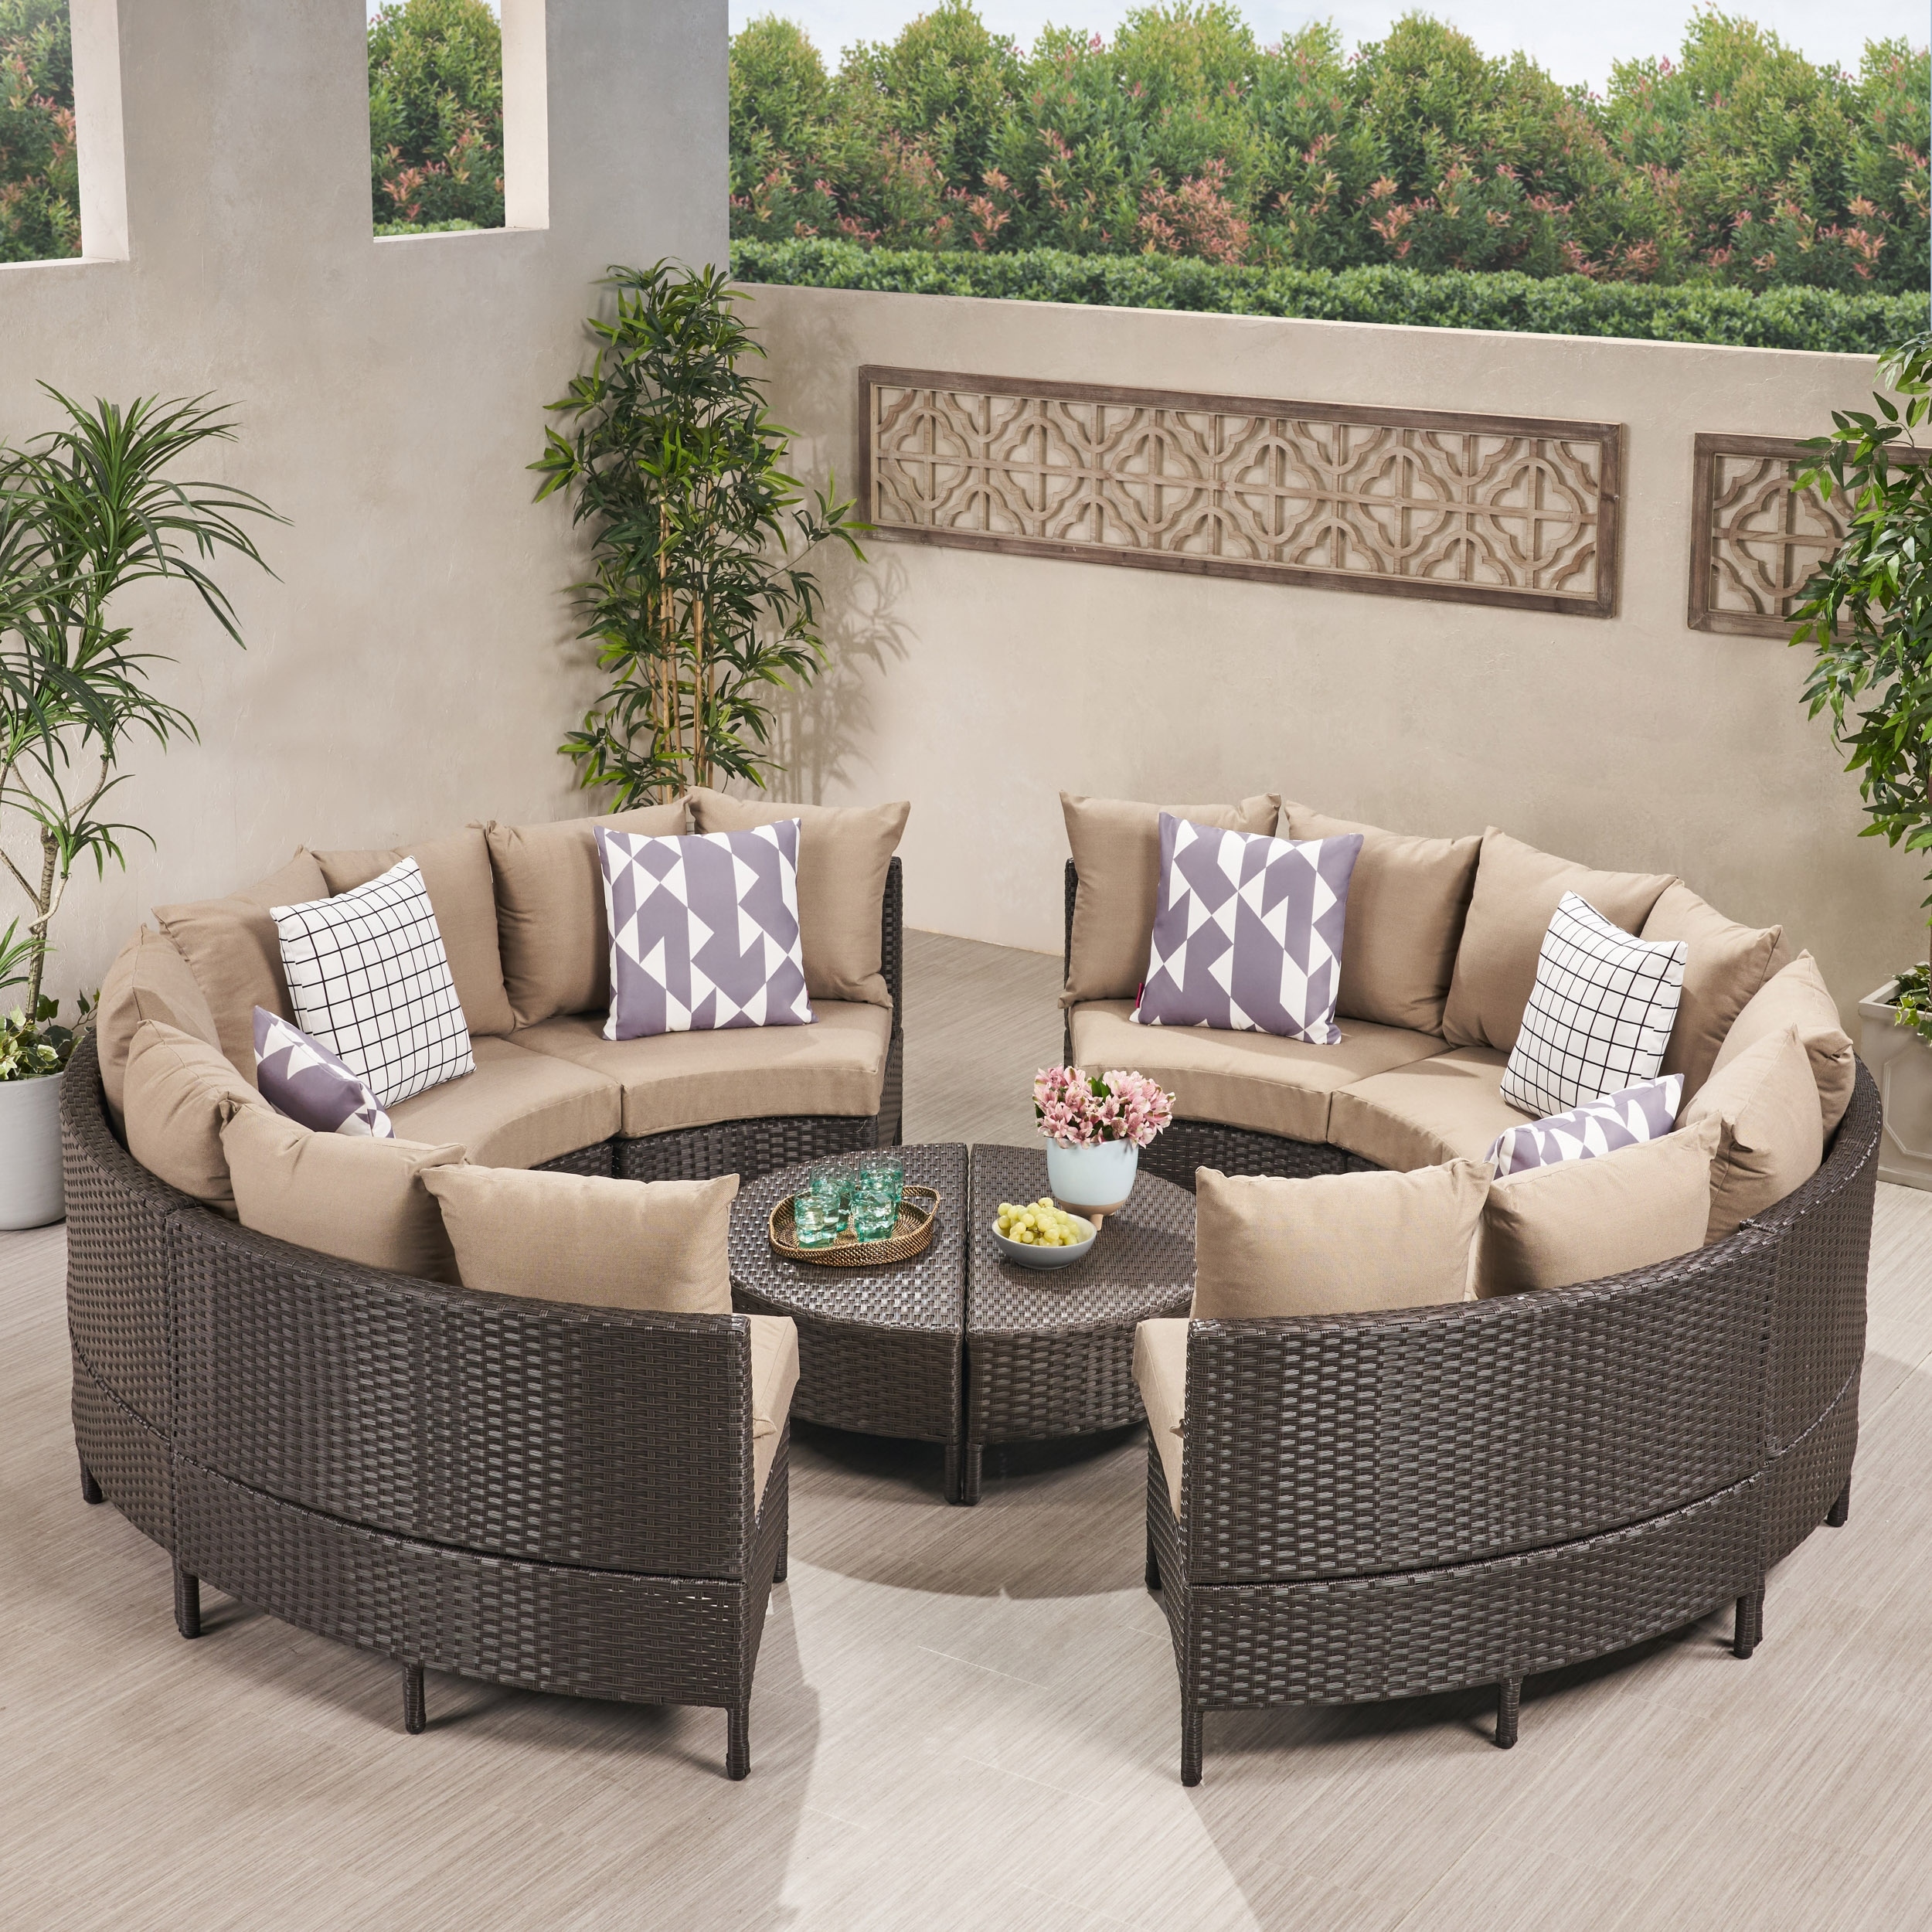 newton all-weather wicker sectional sofa setchristopher knight